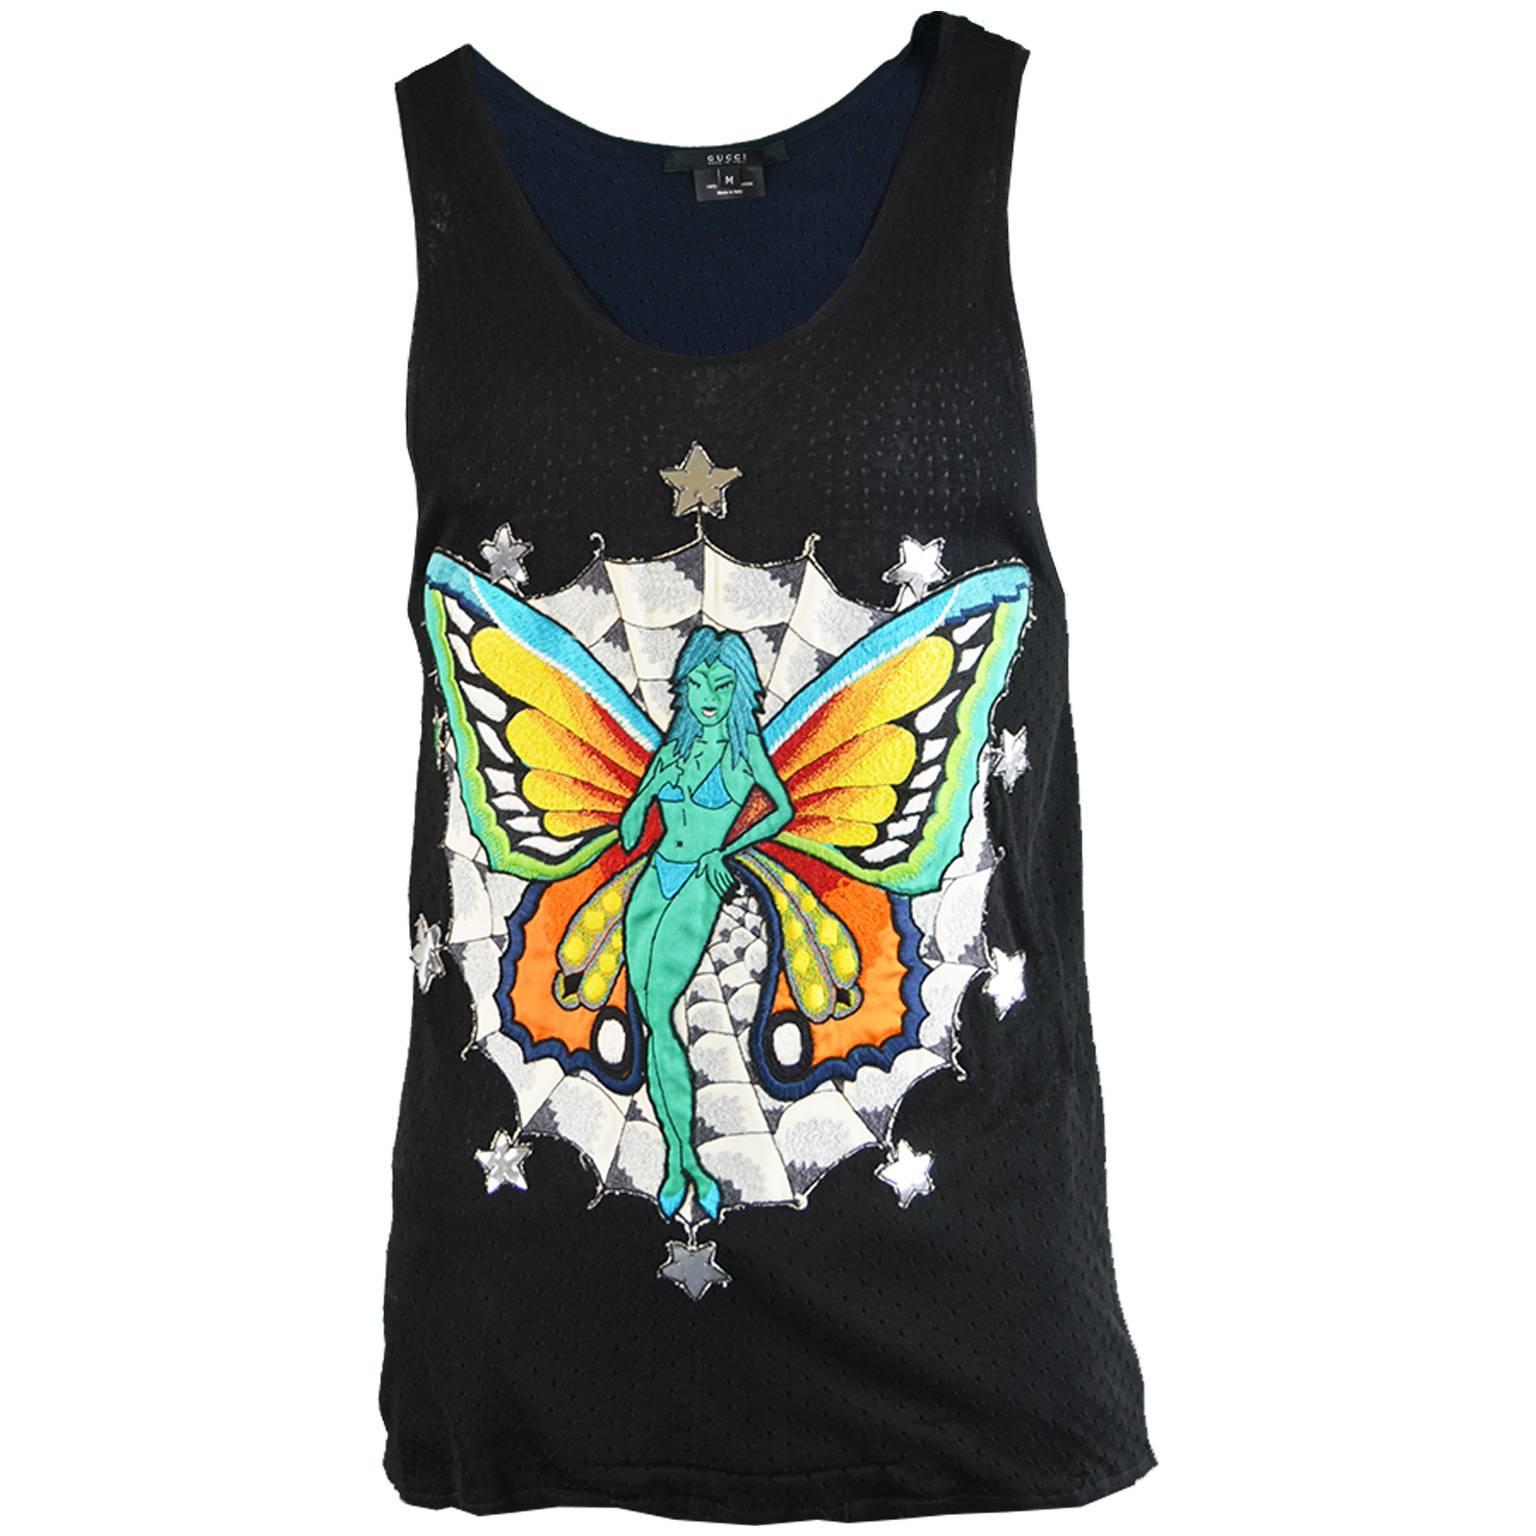 Tom Ford for Gucci Mens Rayon Knit Tank Top with Embroidered Fairy, S/S 2002  For Sale